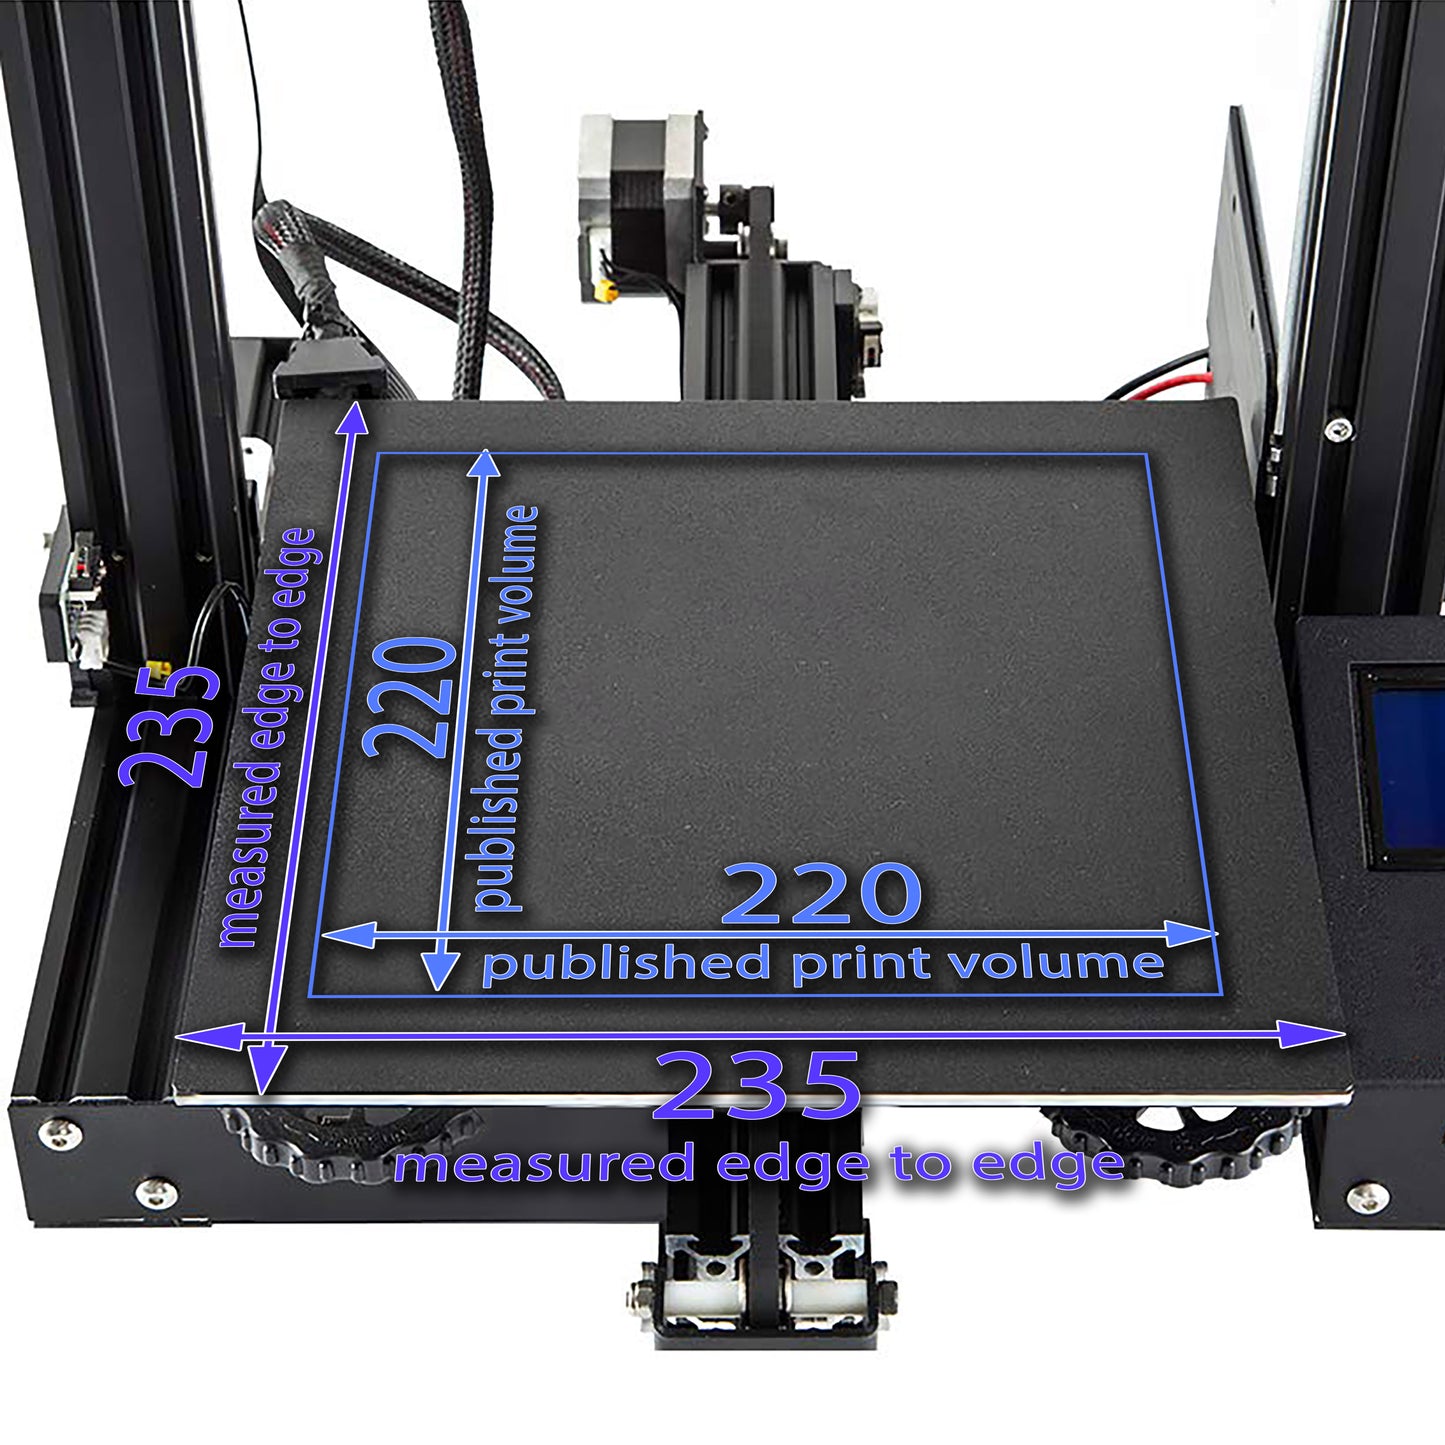 254 x 254 Kit with Pre-Installed PEX Build Surface - VORON Design 2.4 250 and Tronxy XY-2 Pro